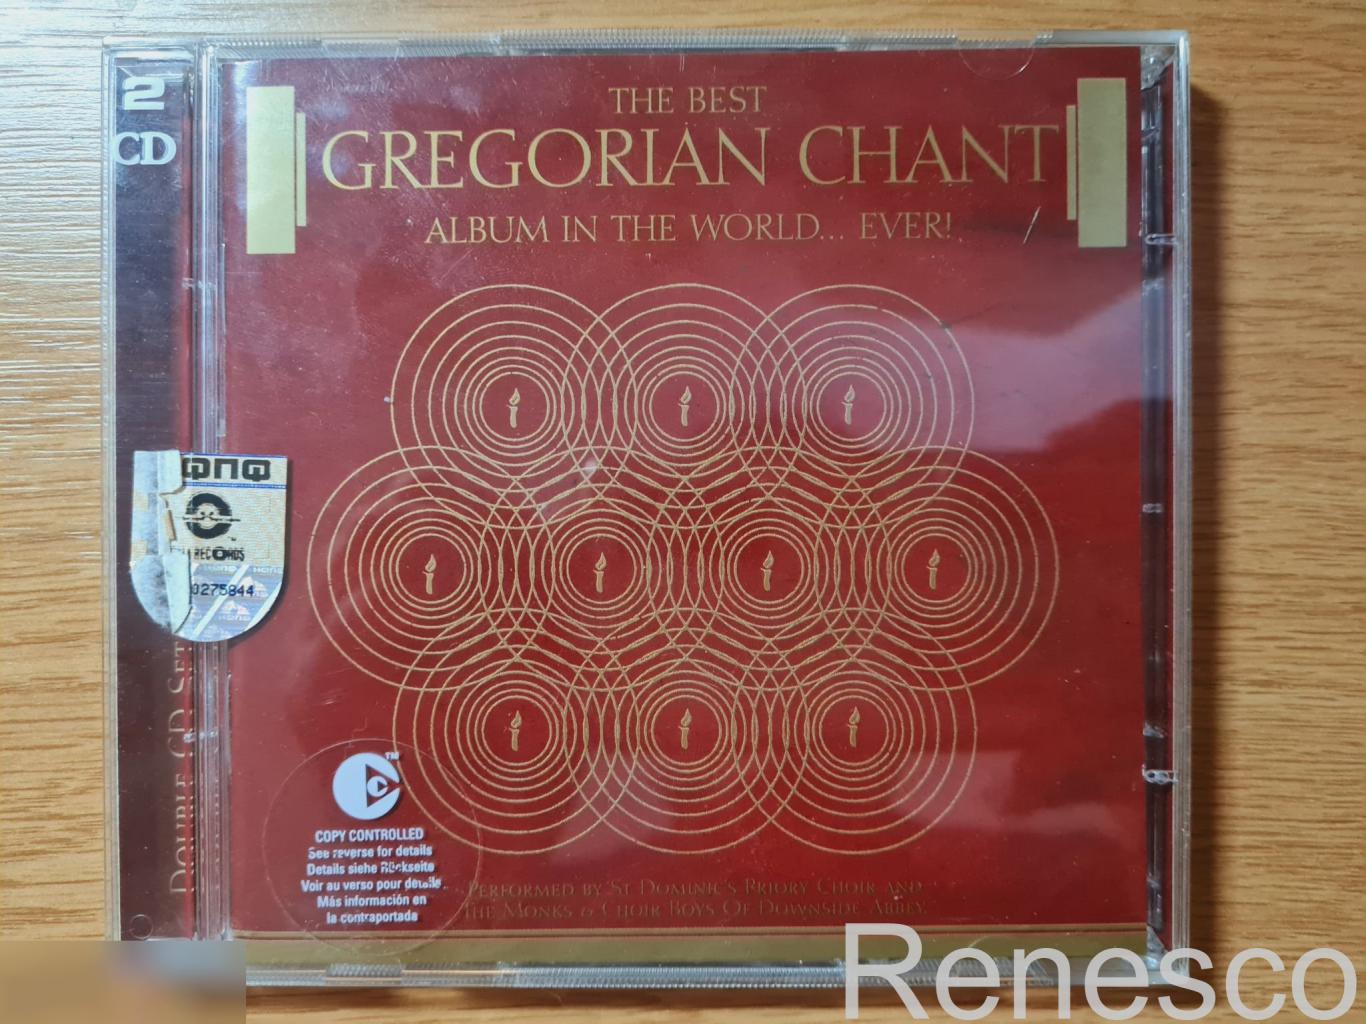 The Best Gregorian Chant Album In The World... Ever! (Europe) (2004)